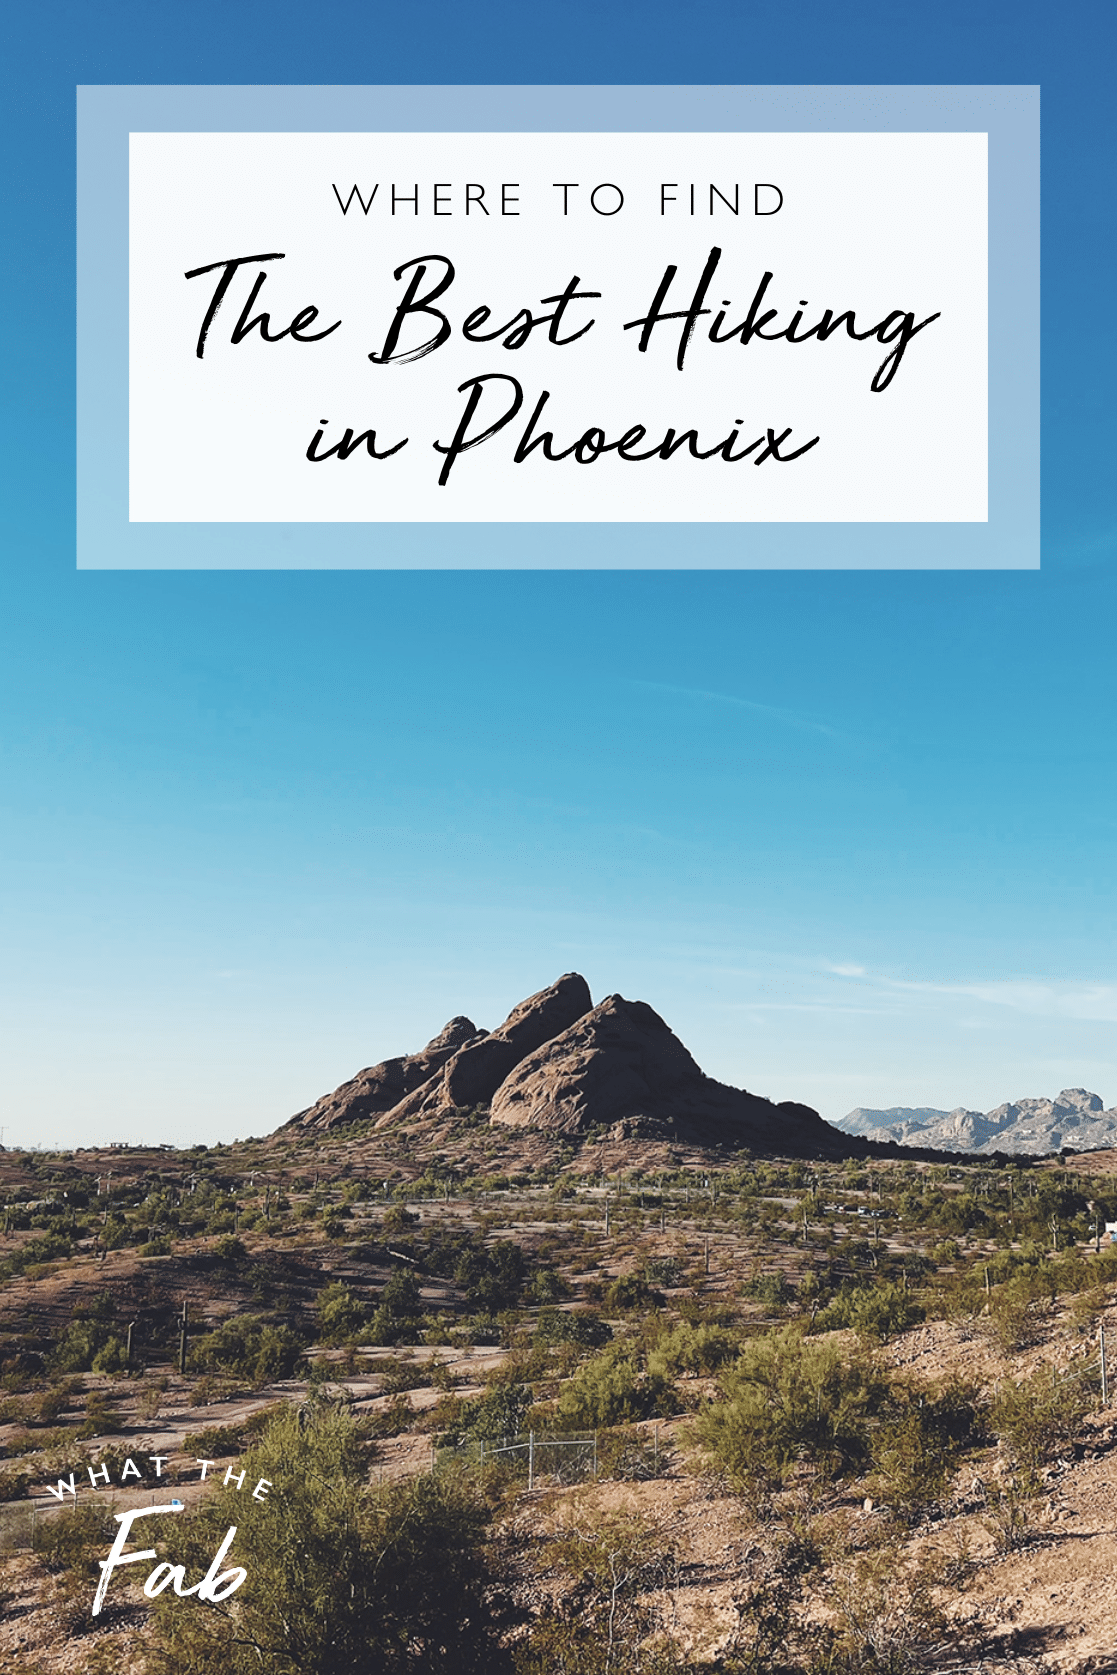 The Best Hiking in Phoenix, by Travel Blogger What The Fab